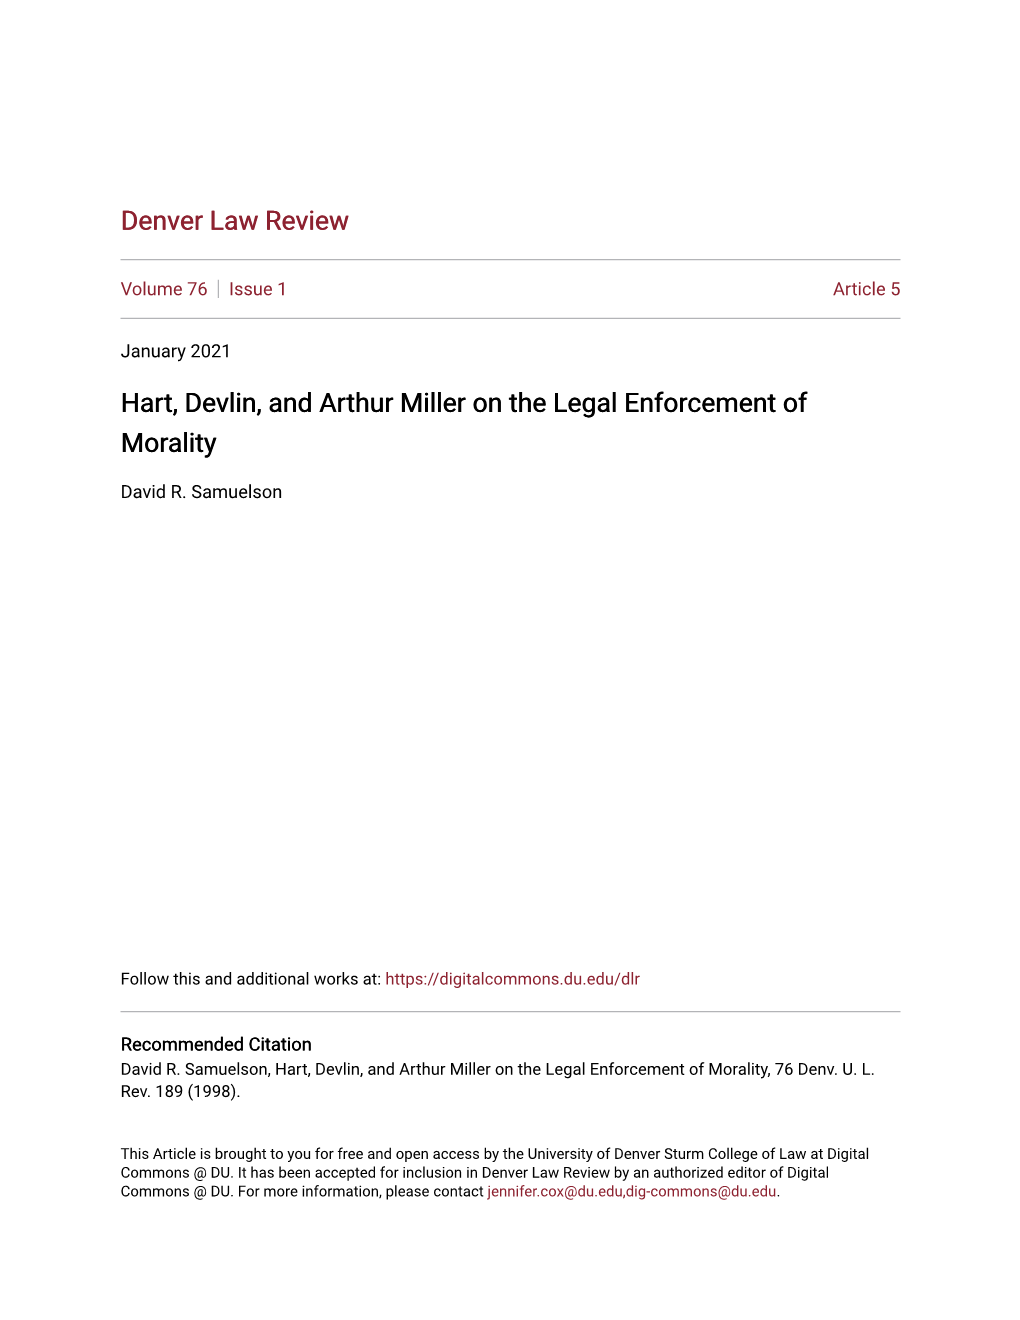 Hart, Devlin, and Arthur Miller on the Legal Enforcement of Morality